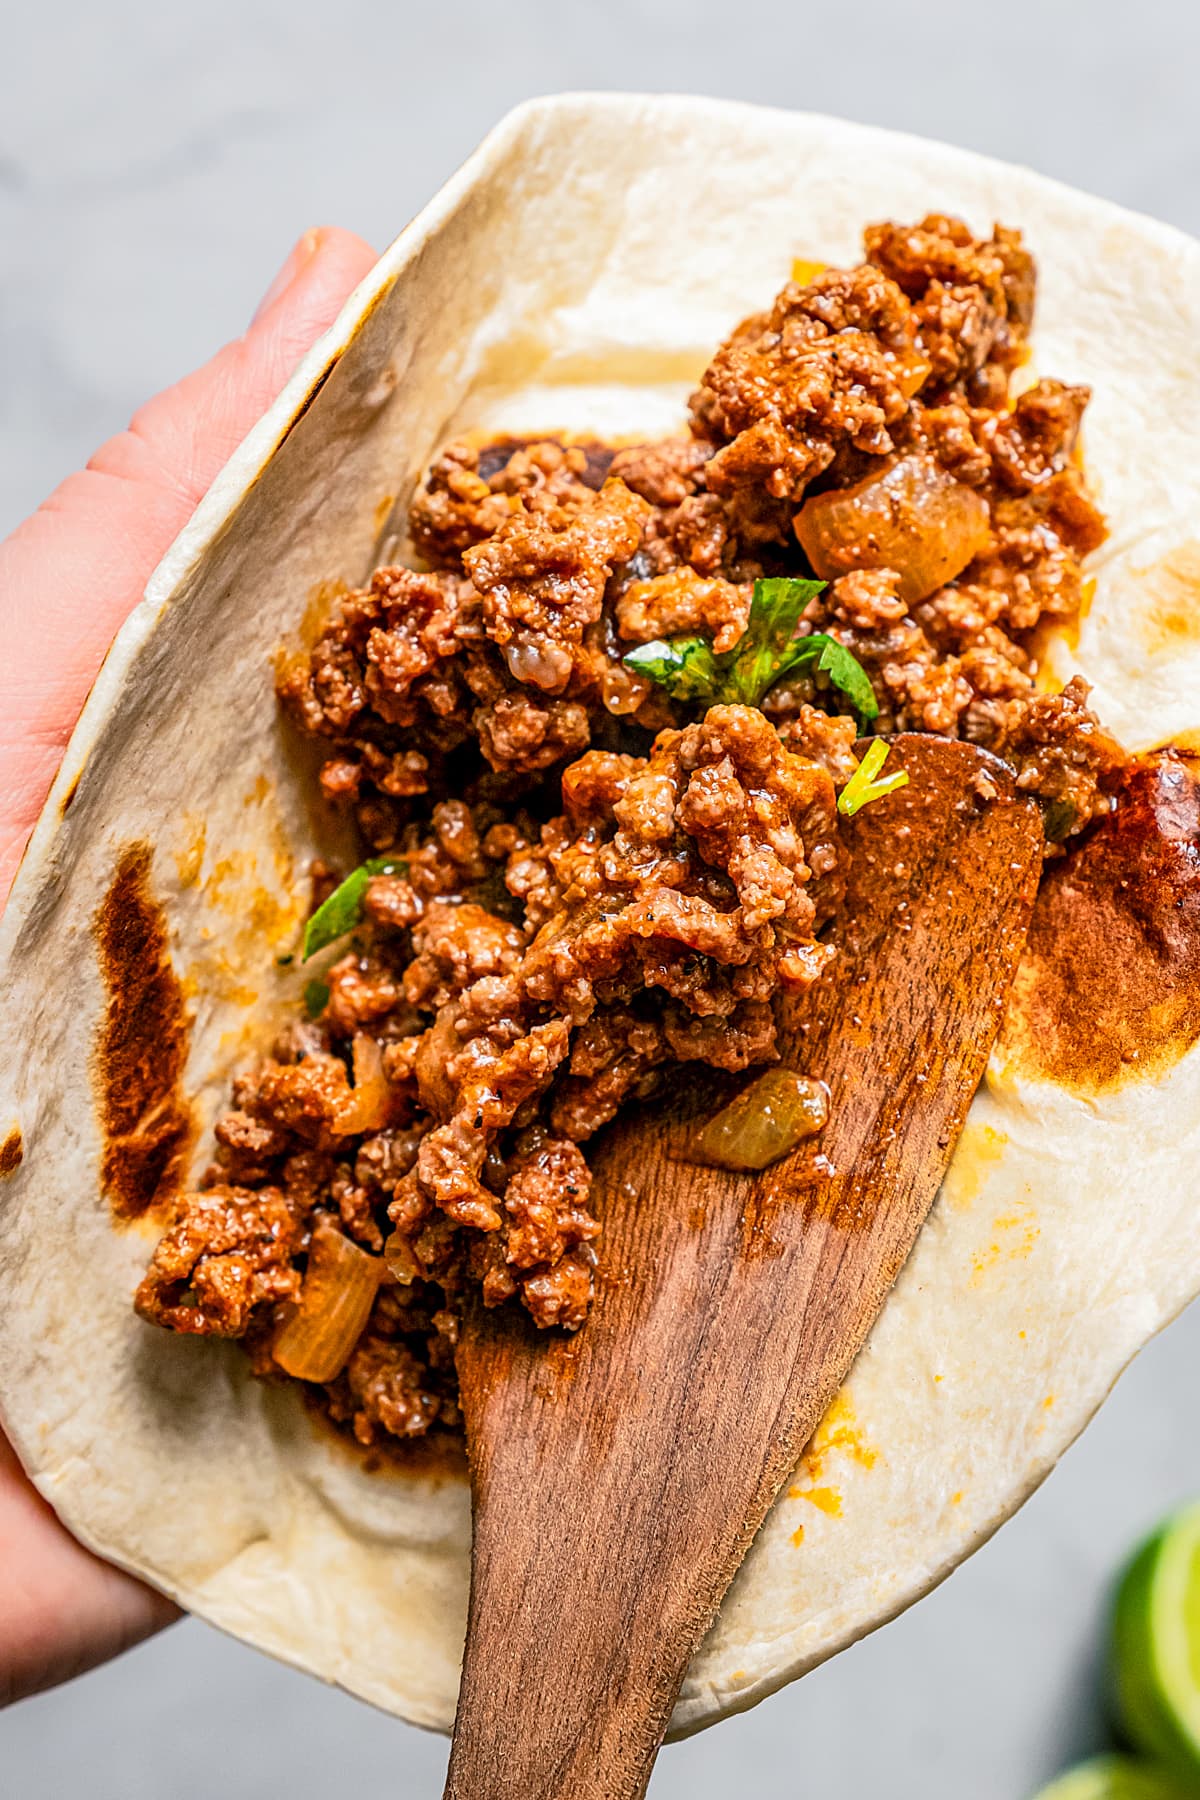 Stuffing a flour tortilla with taco meat.